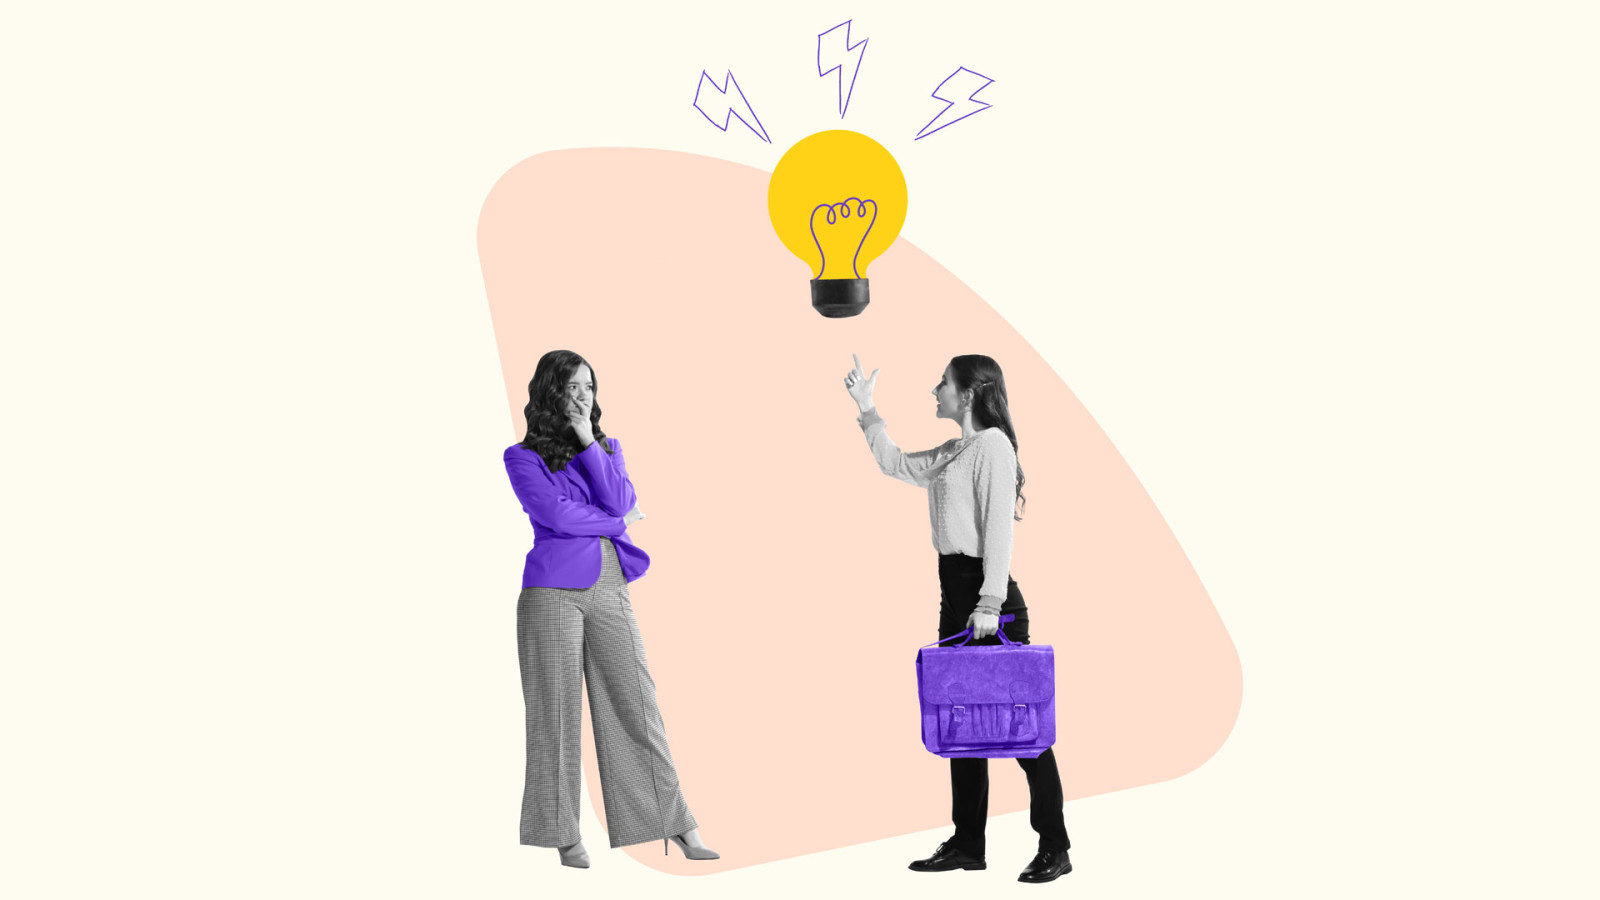 Creative conceptual design. Professional discussion. Woman with light bulb above head symbolising professional inspiration.